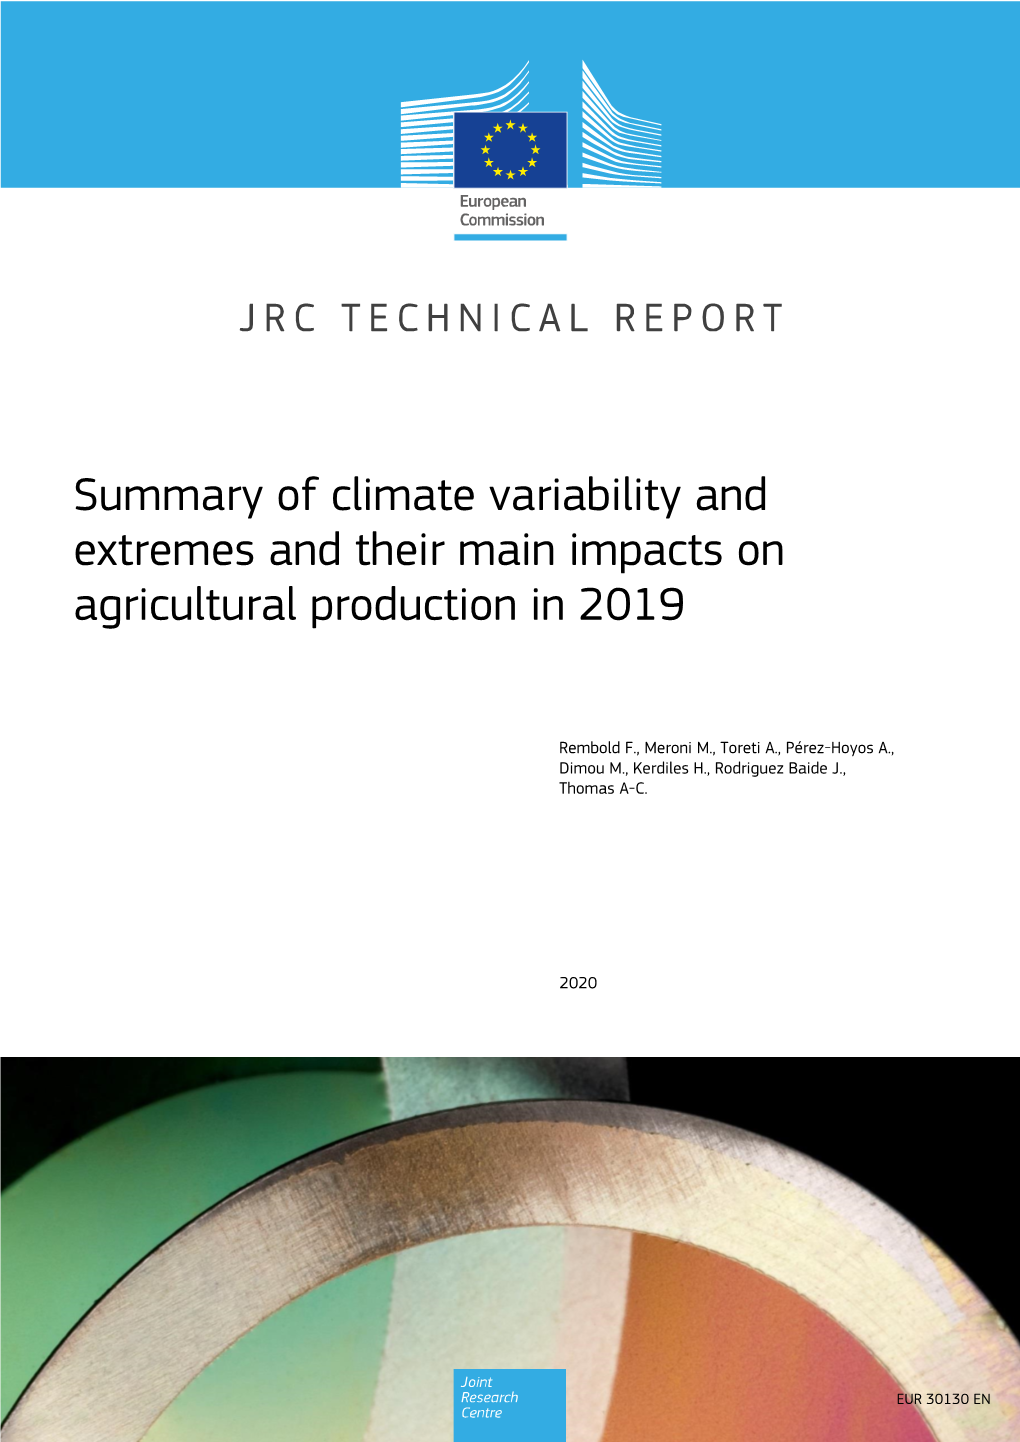 Summary of Climate Variability and Extremes and Their Main Impacts on Agricultural Production in 2019